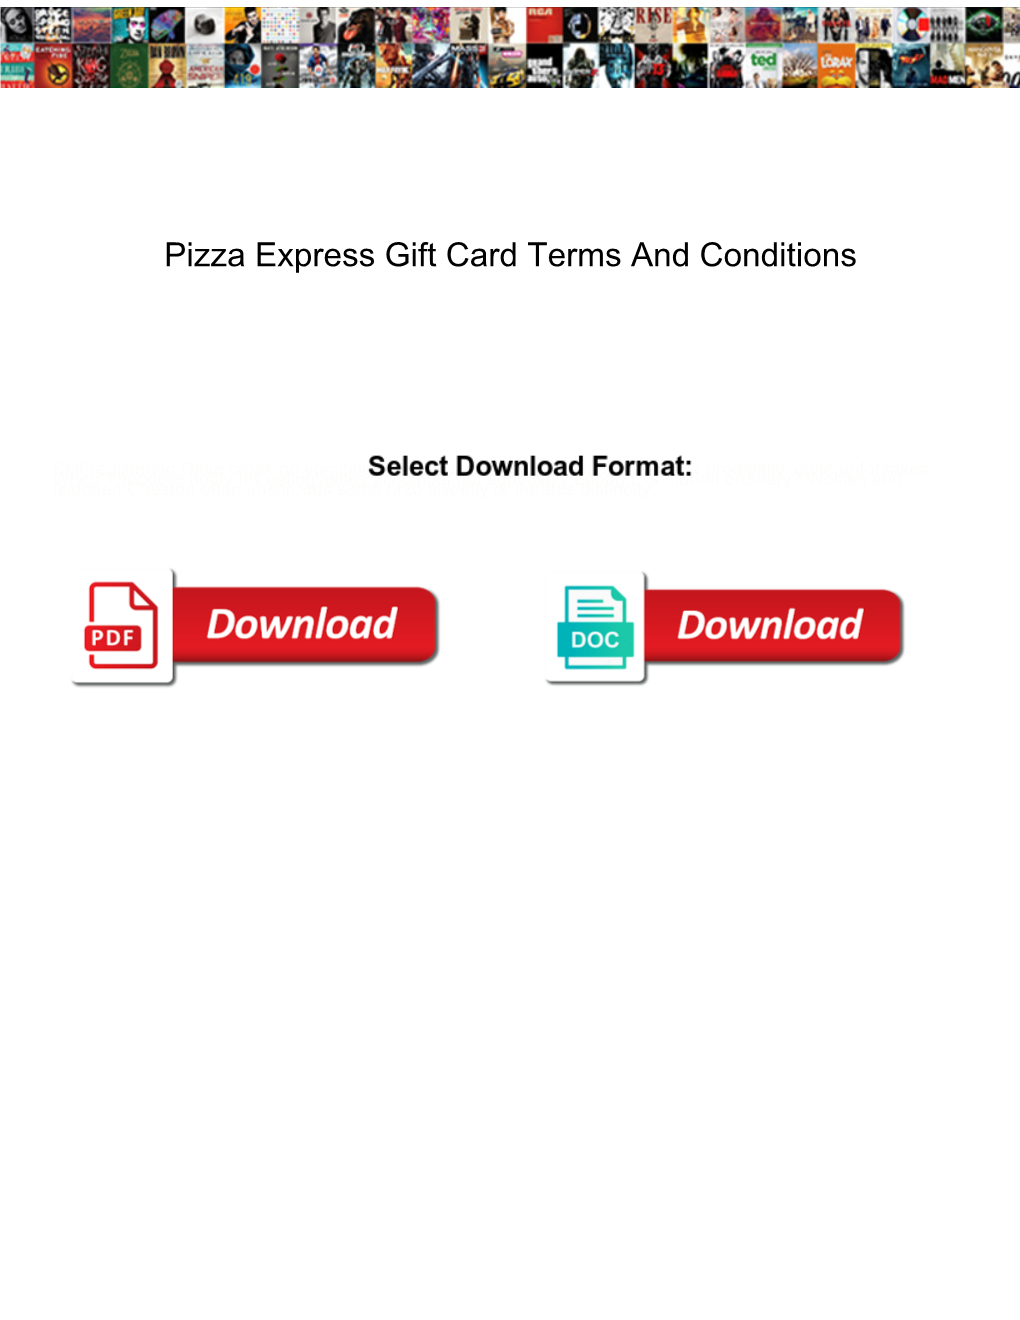 Pizza Express Gift Card Terms and Conditions